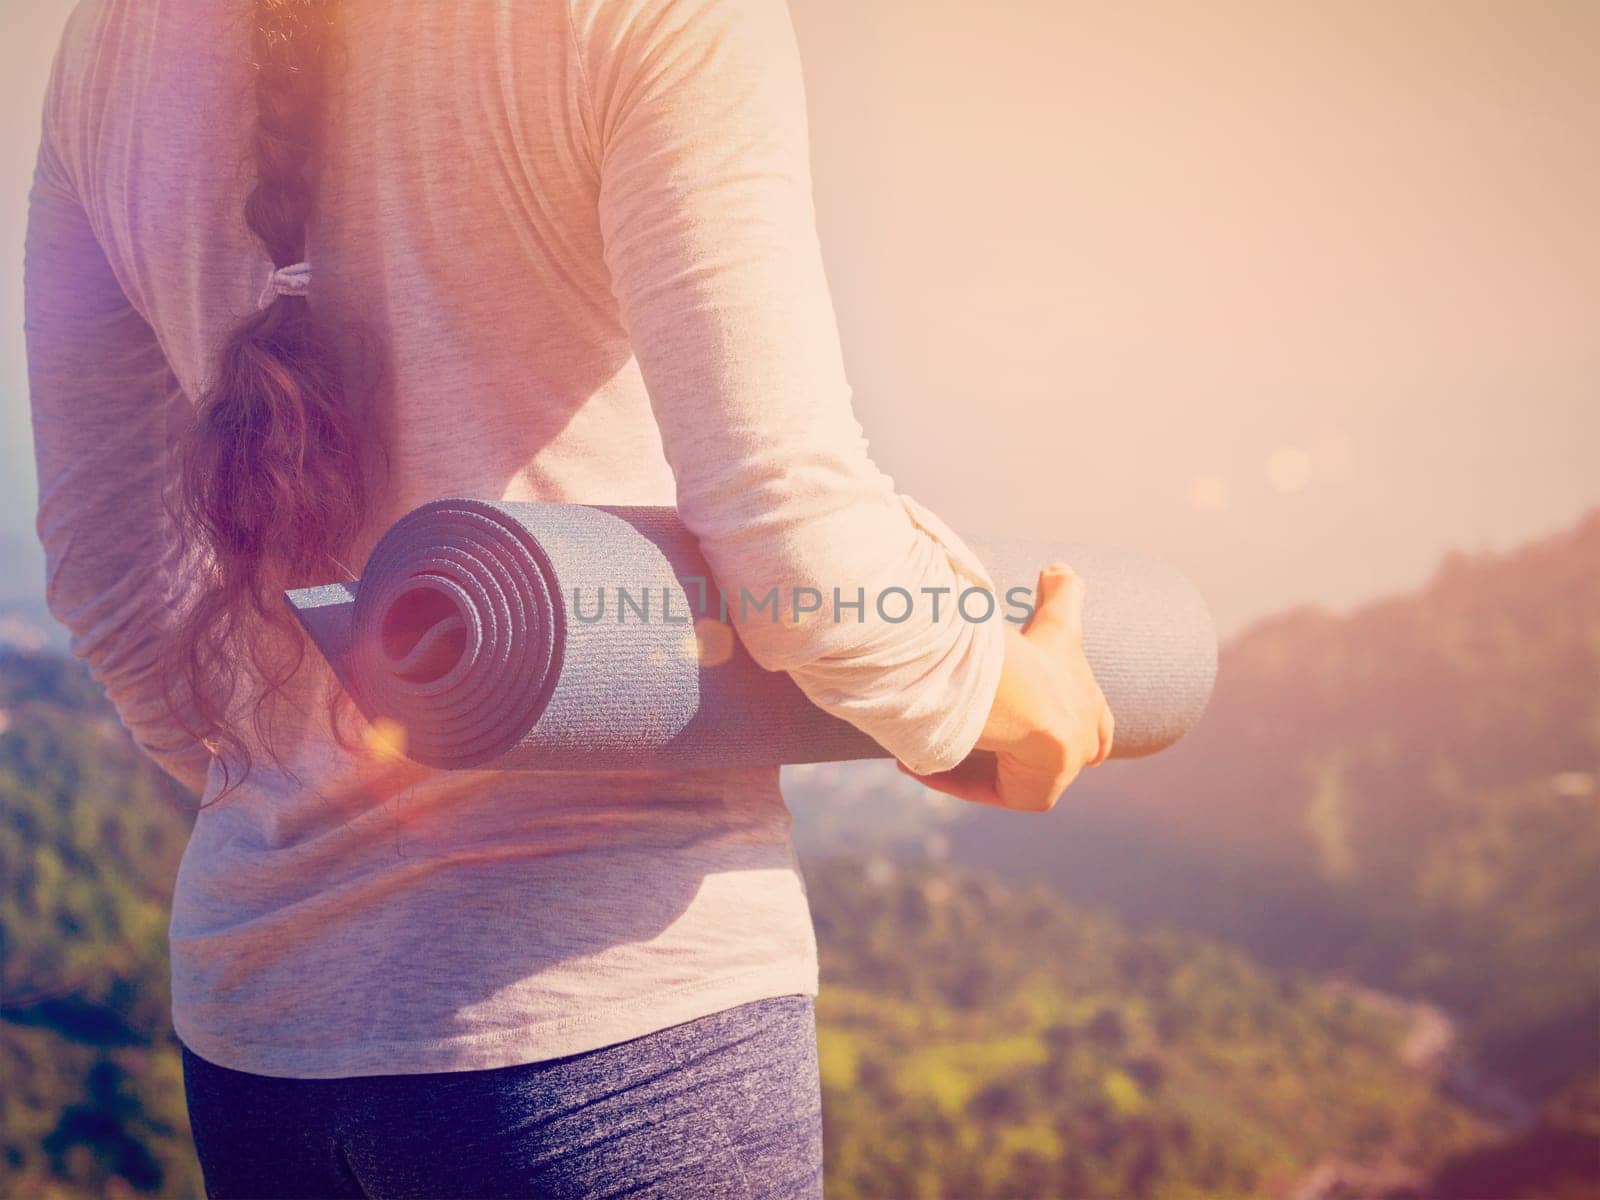 Woman standing with yoga mat outdoors in mountains close up with copyspace. With light leak and lens flare. Vintage retro effect filtered hipster style image.